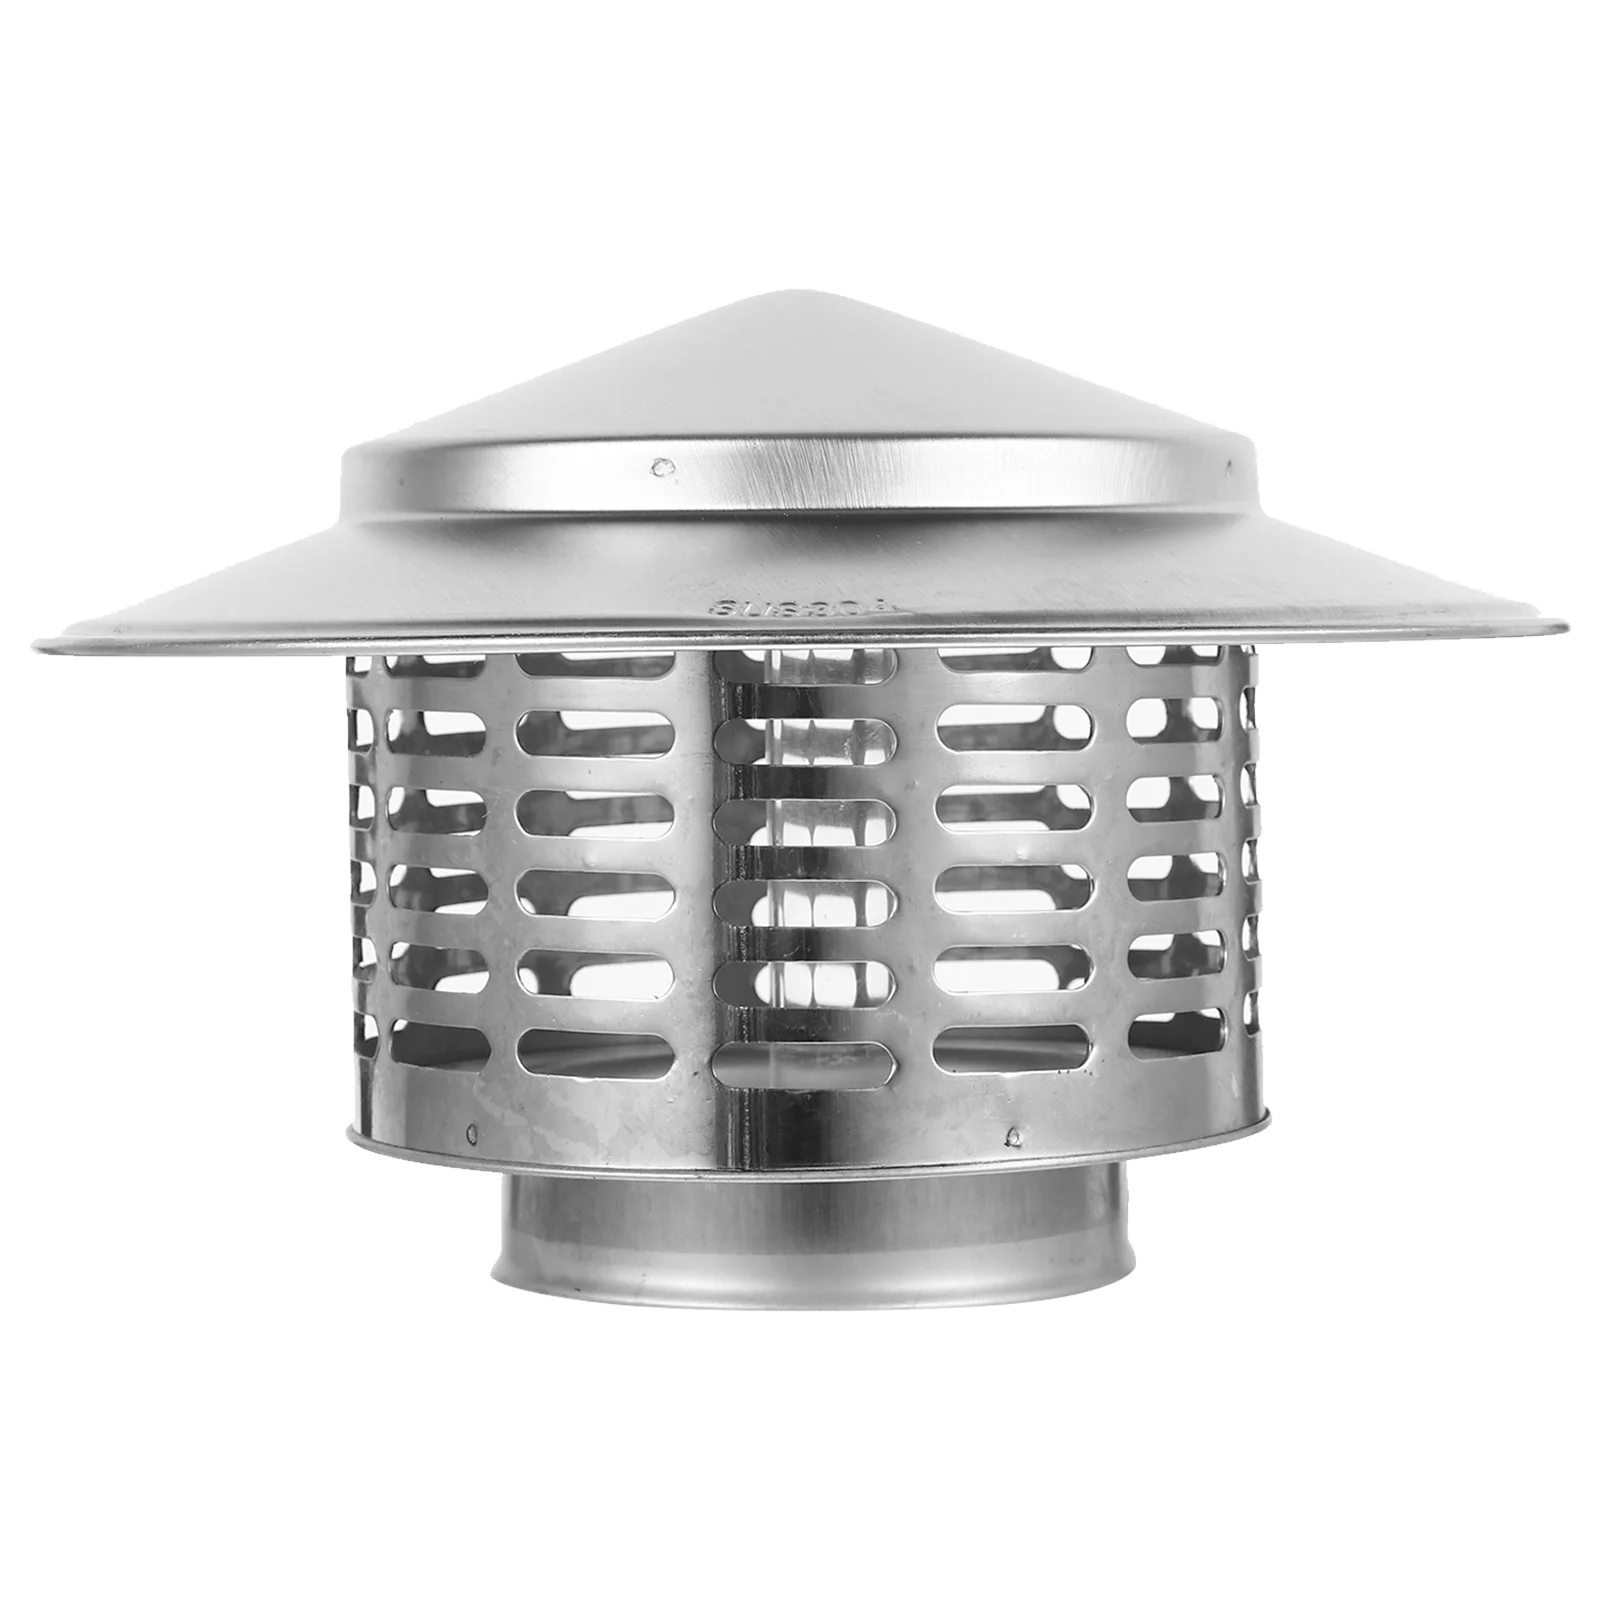 

Chimney Flashing Cap Rainproof Smokestack Cover Vent Caps Flue Cowl Rains Outdoor Metal Rv Covers for